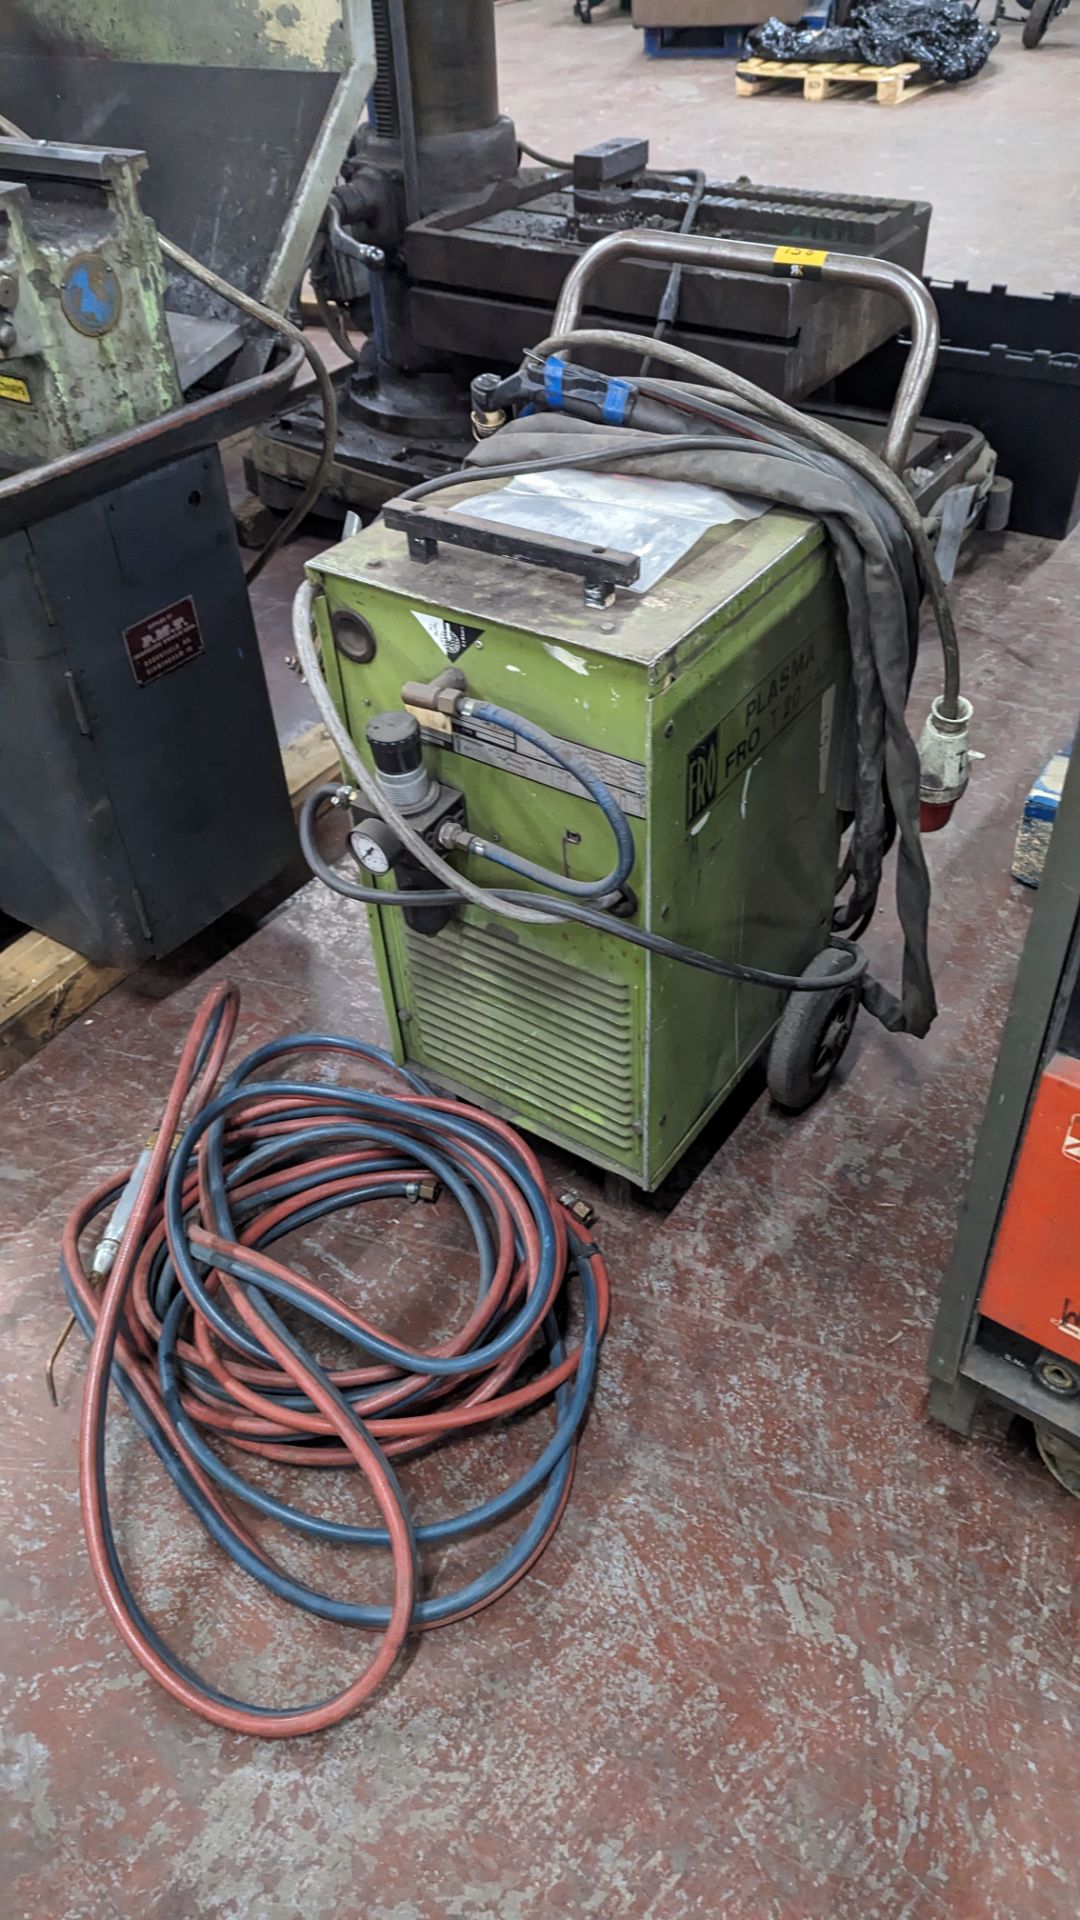 Fro T20/40 plasma cutting device and gas torch and hose